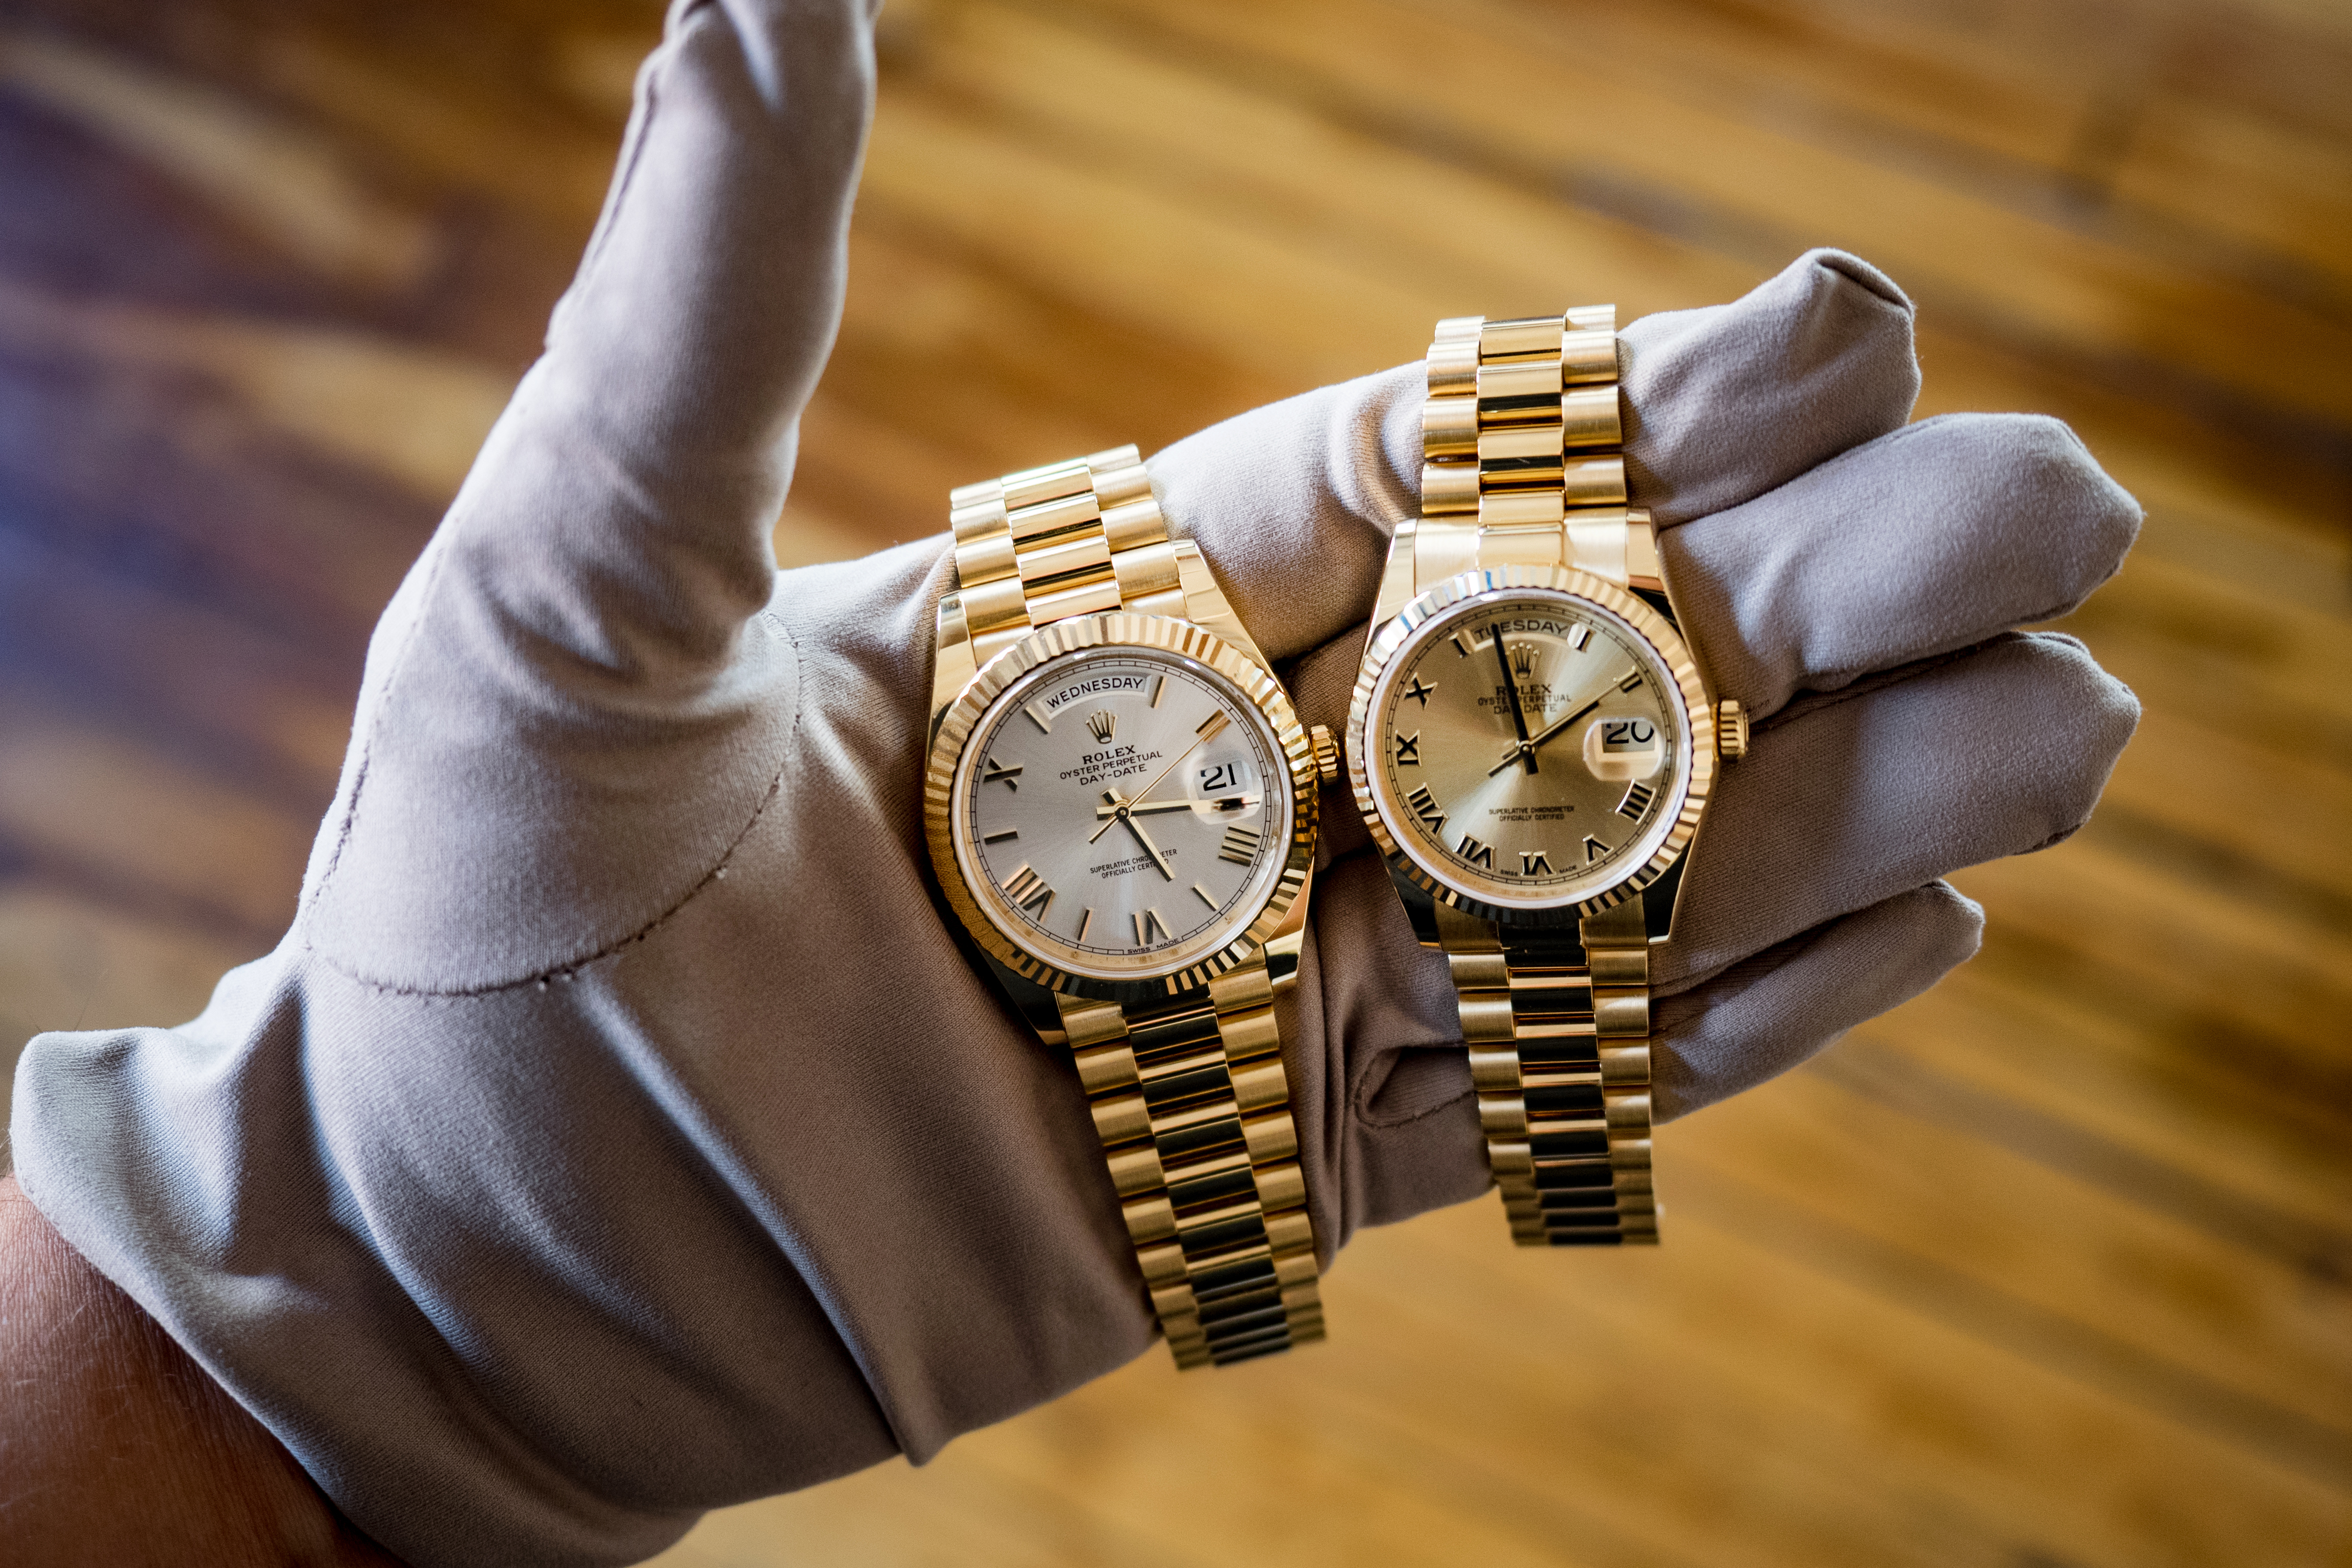 gold day date 36mm